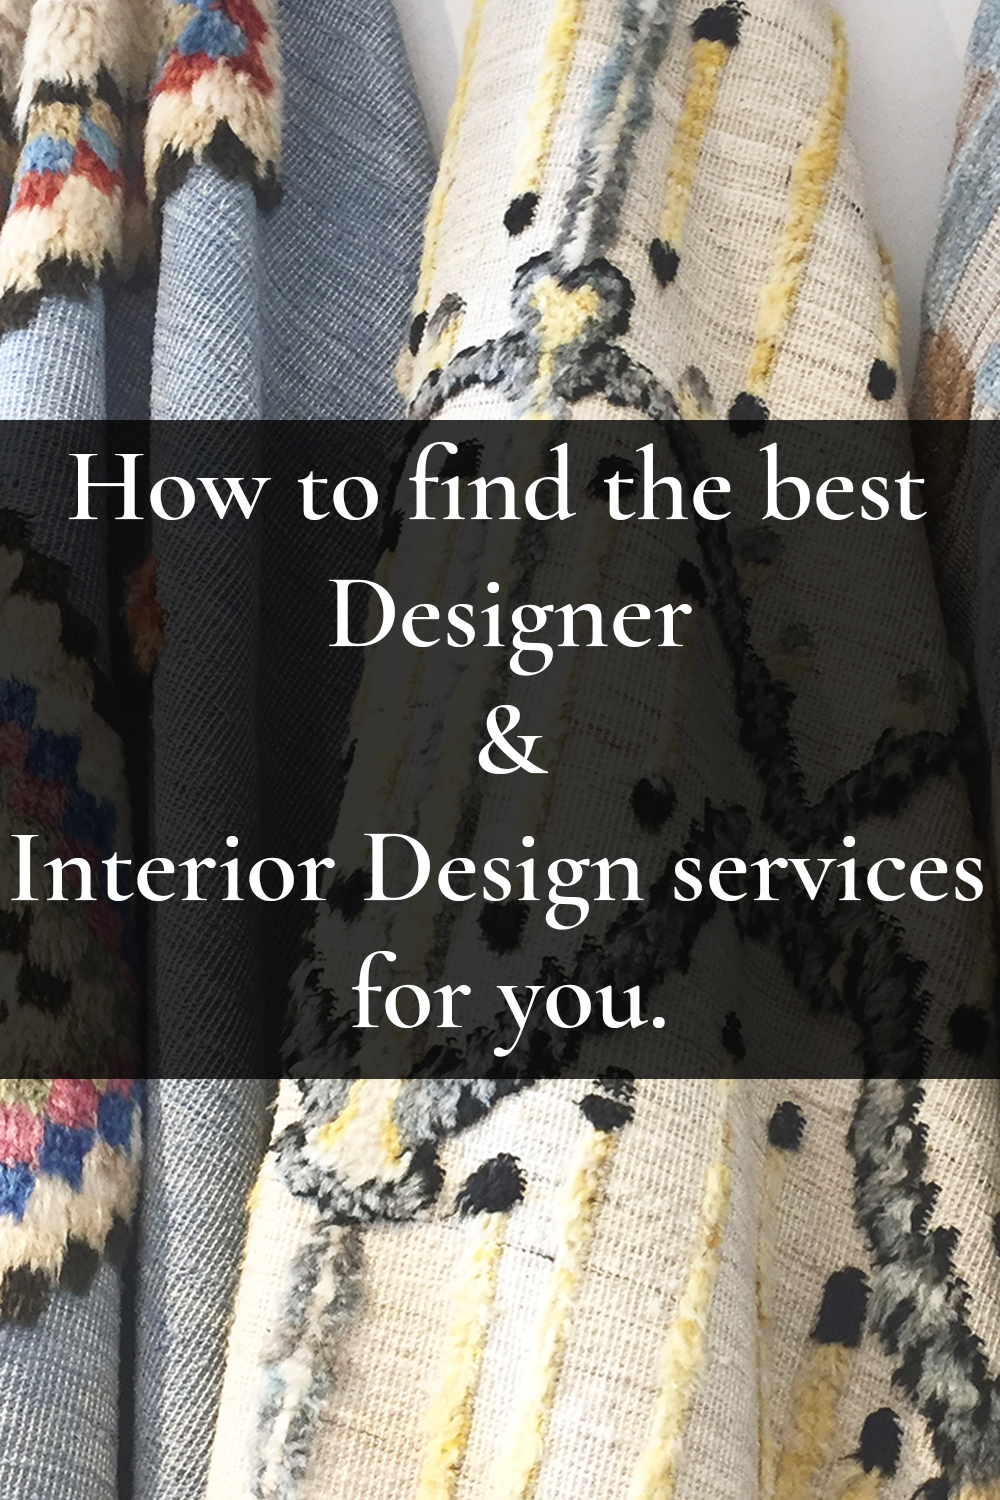 How to find the best interior design services &amp; designer for you. (Copy) (Copy) (Copy) (Copy) (Copy) (Copy) (Copy) (Copy) (Copy) (Copy) (Copy) (Copy) (Copy) (Copy) (Copy) (Copy) (Copy) (Cop (Copy)